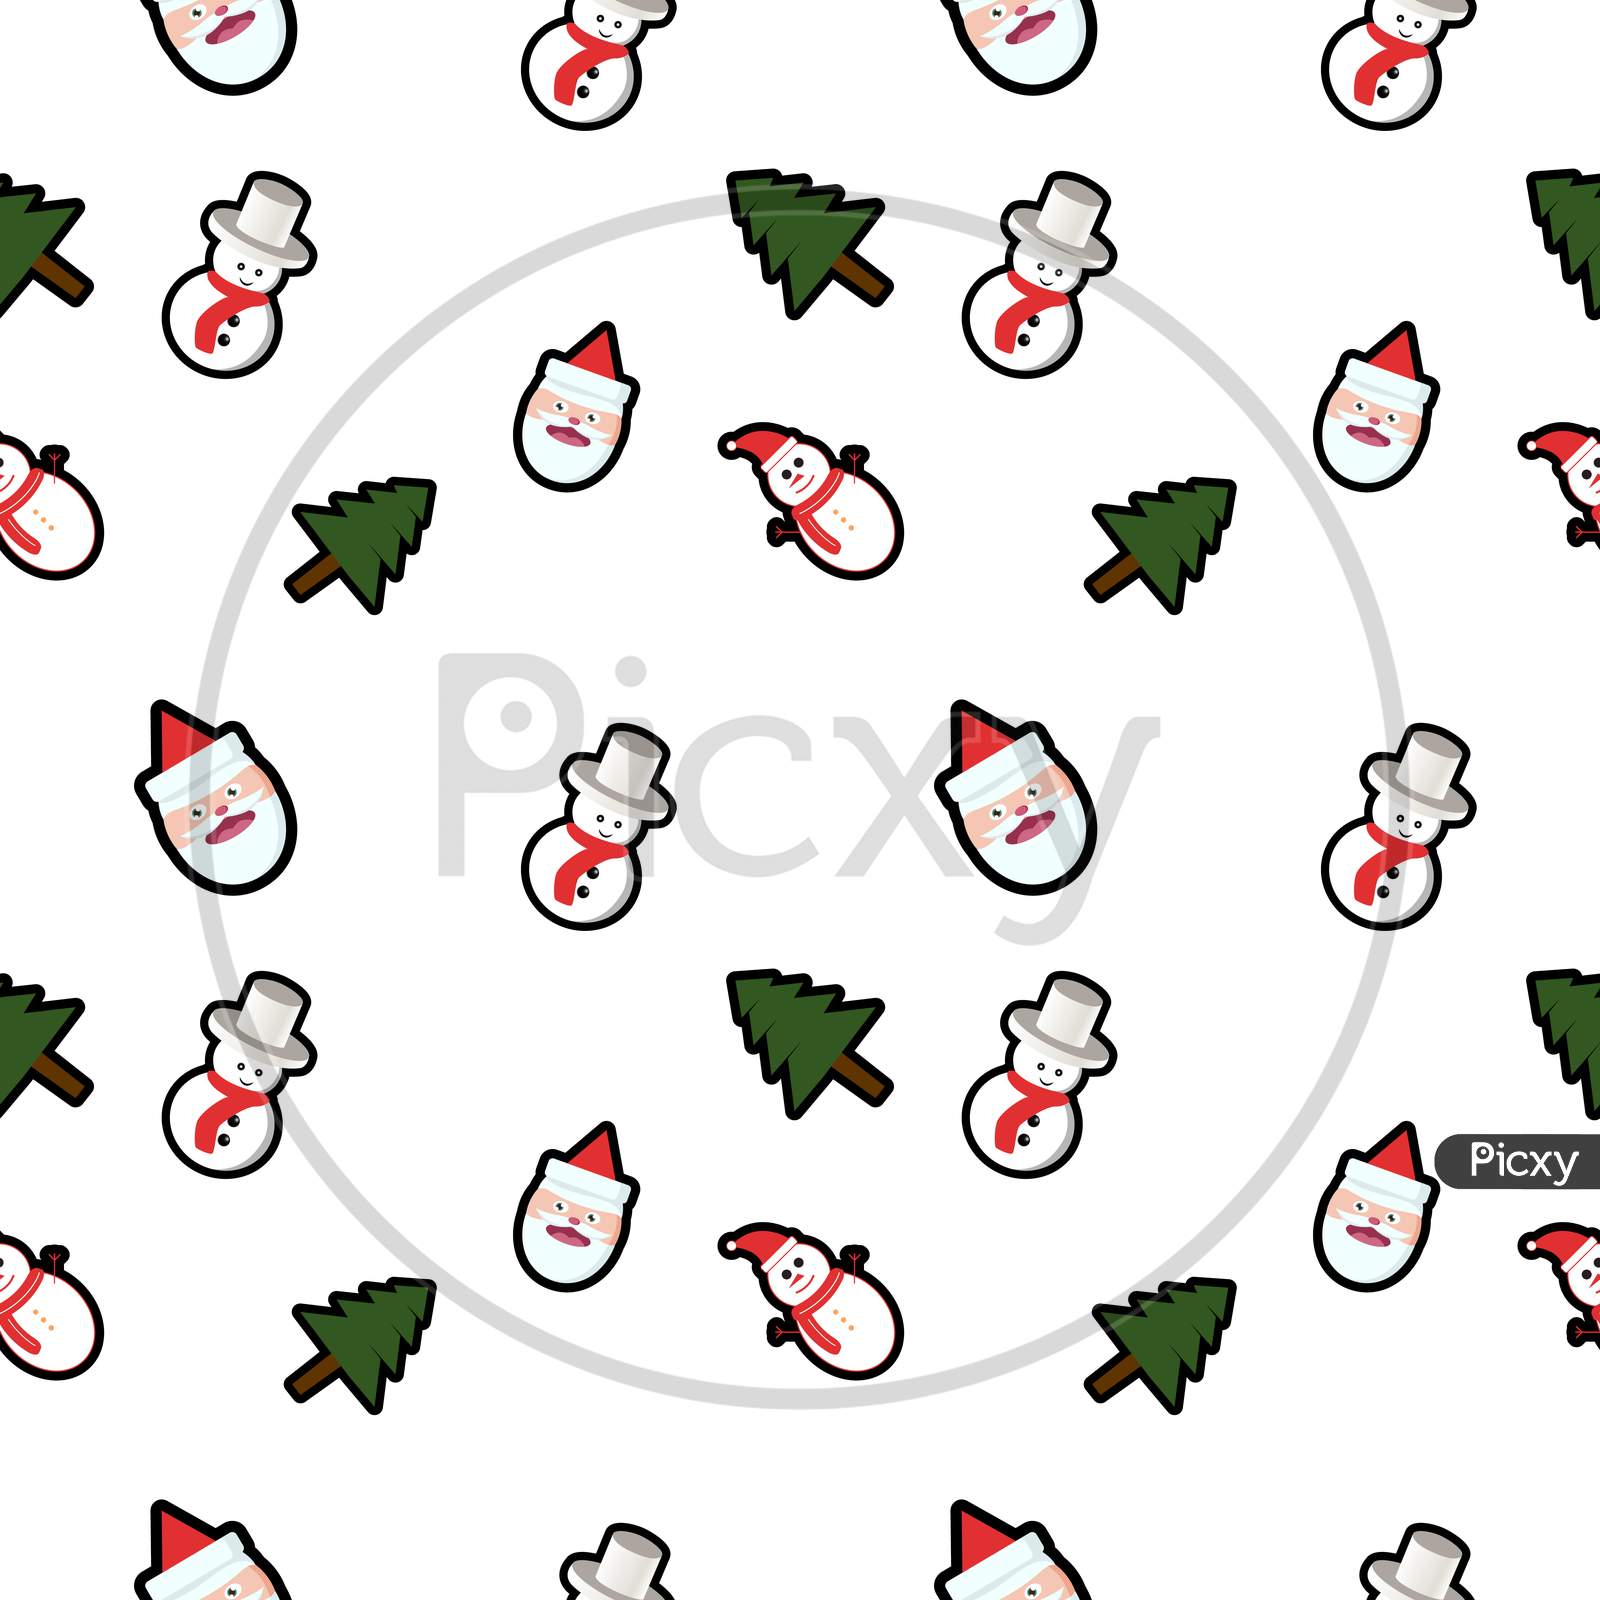 Santa Claus Head With Hat, Christmas Tree, Snowman Seamless Pattern Background. Perfect For Winter Holiday Fabric, Giftwrap, Scrapbook, Greeting Cards Design Projects.